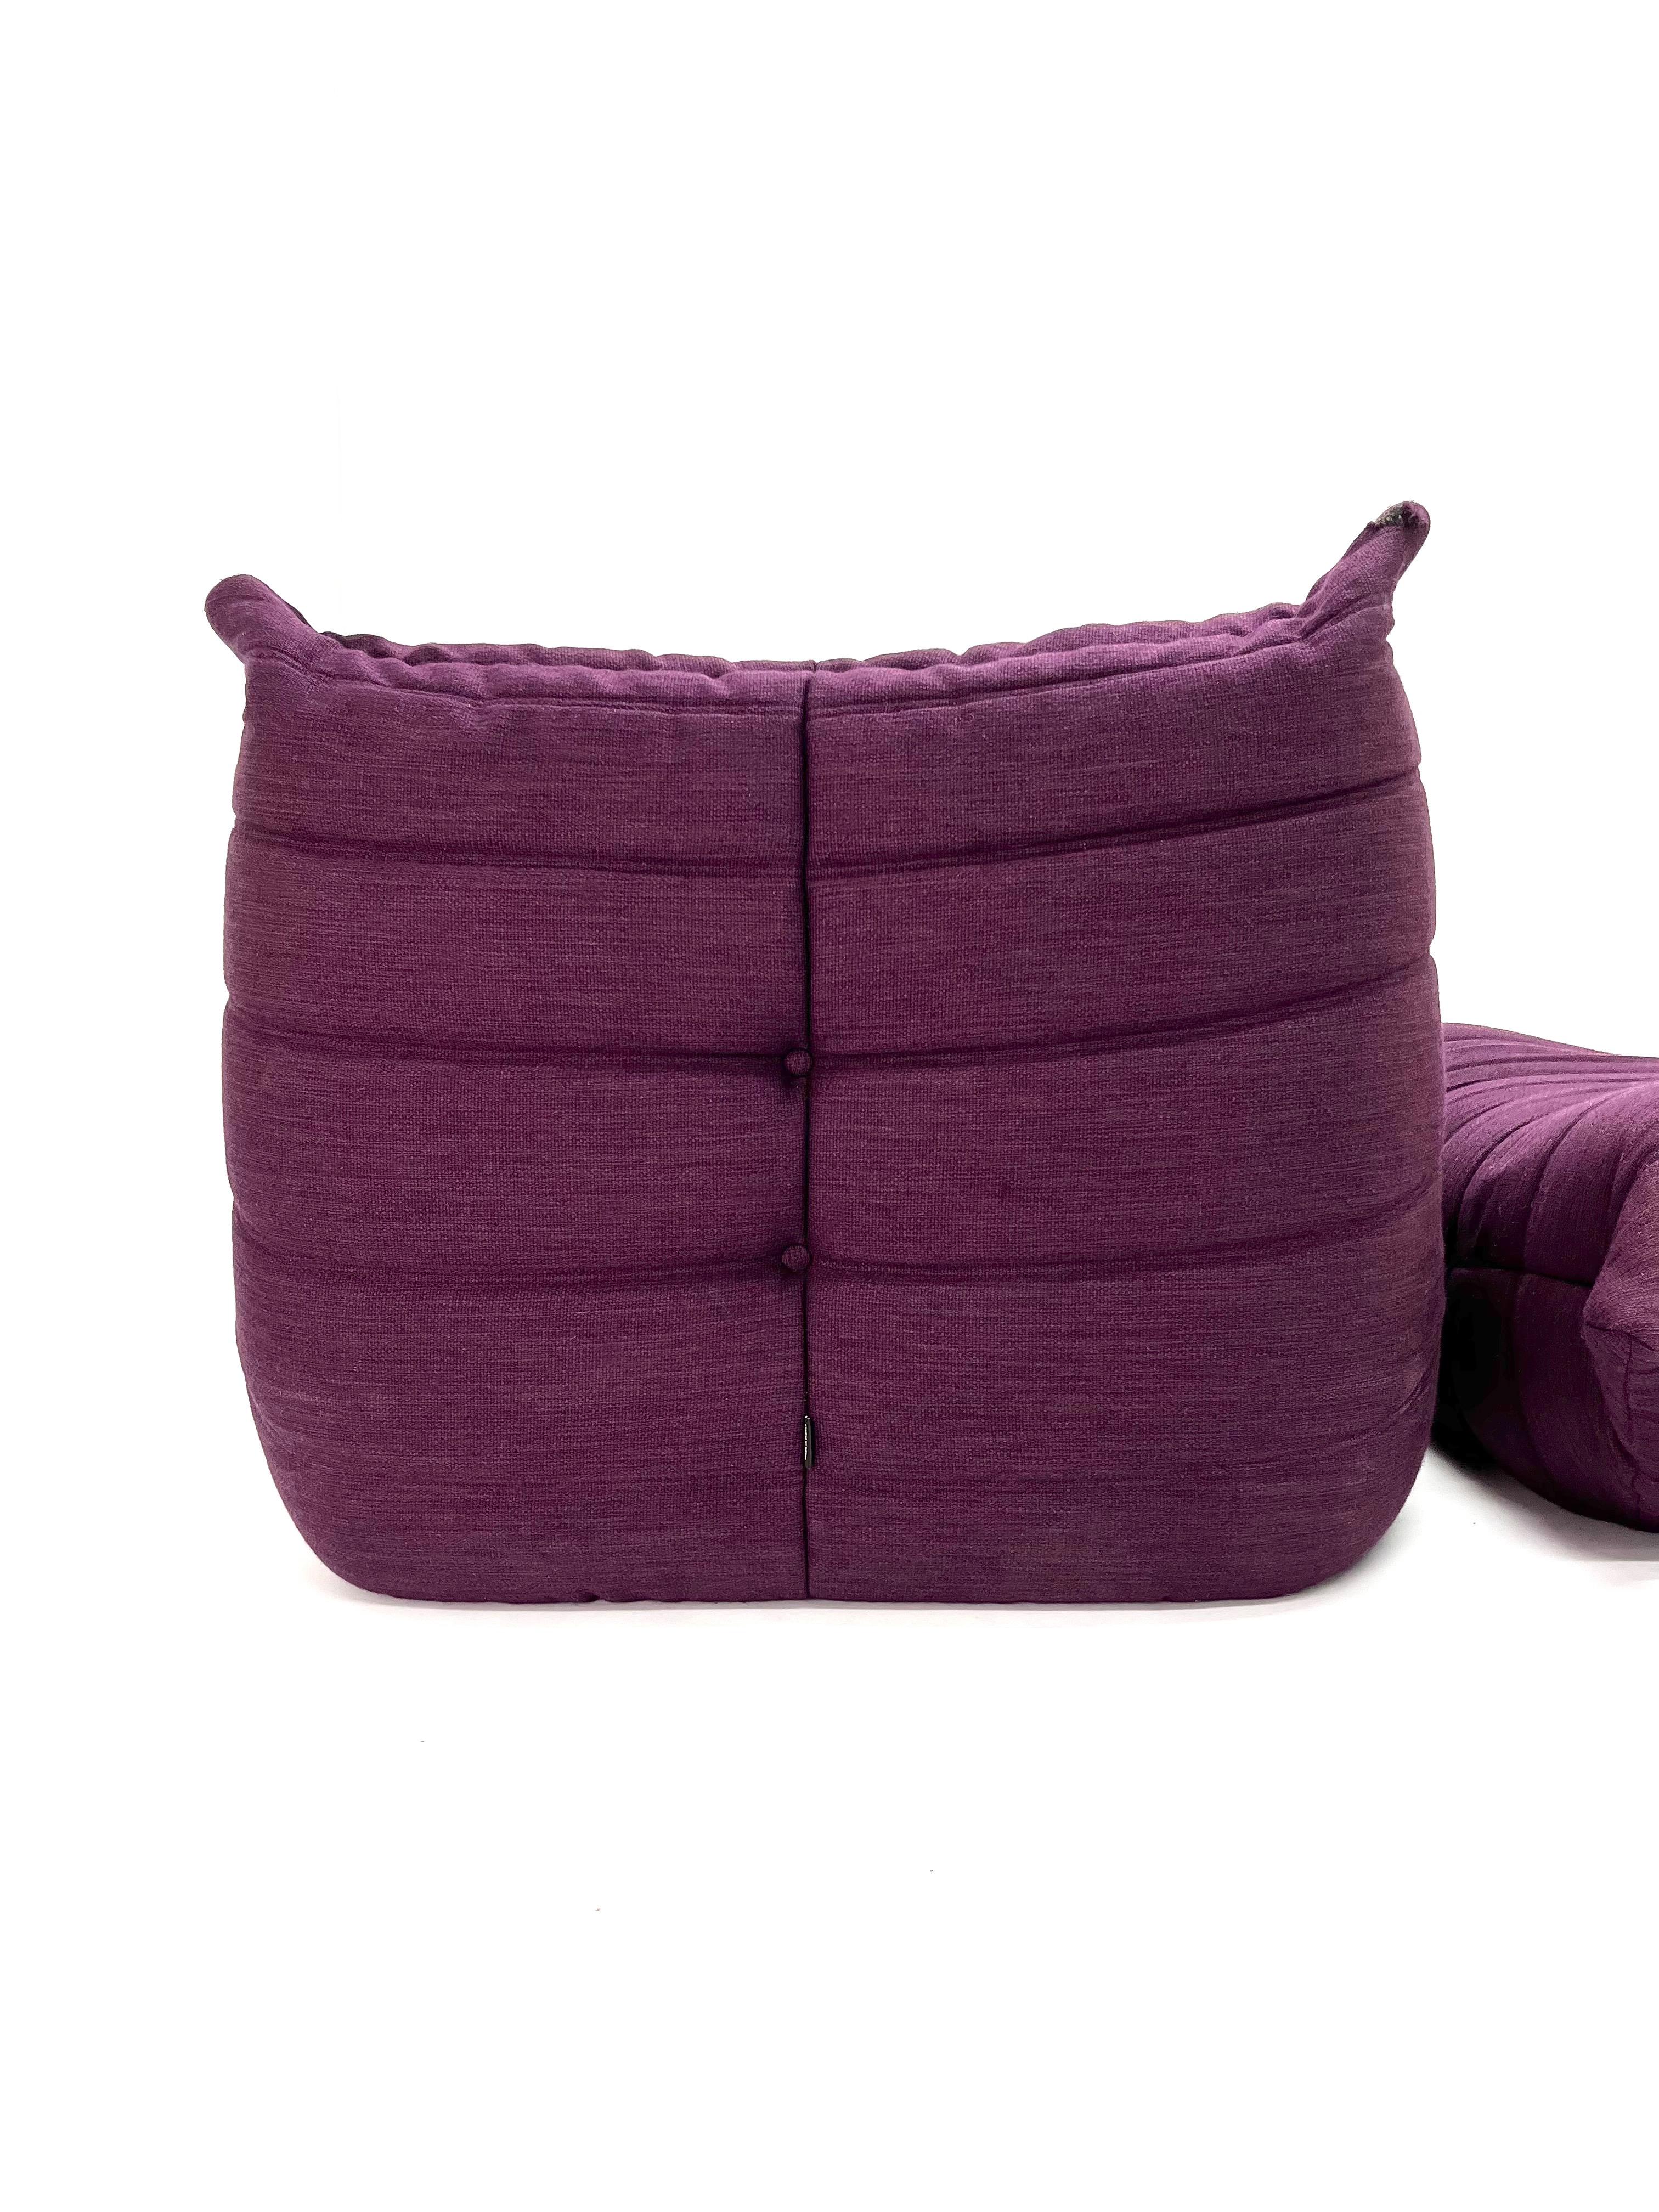 Togo Chair and Ottoman in Purple by Michel Ducaroy for Ligne Roset For Sale 7